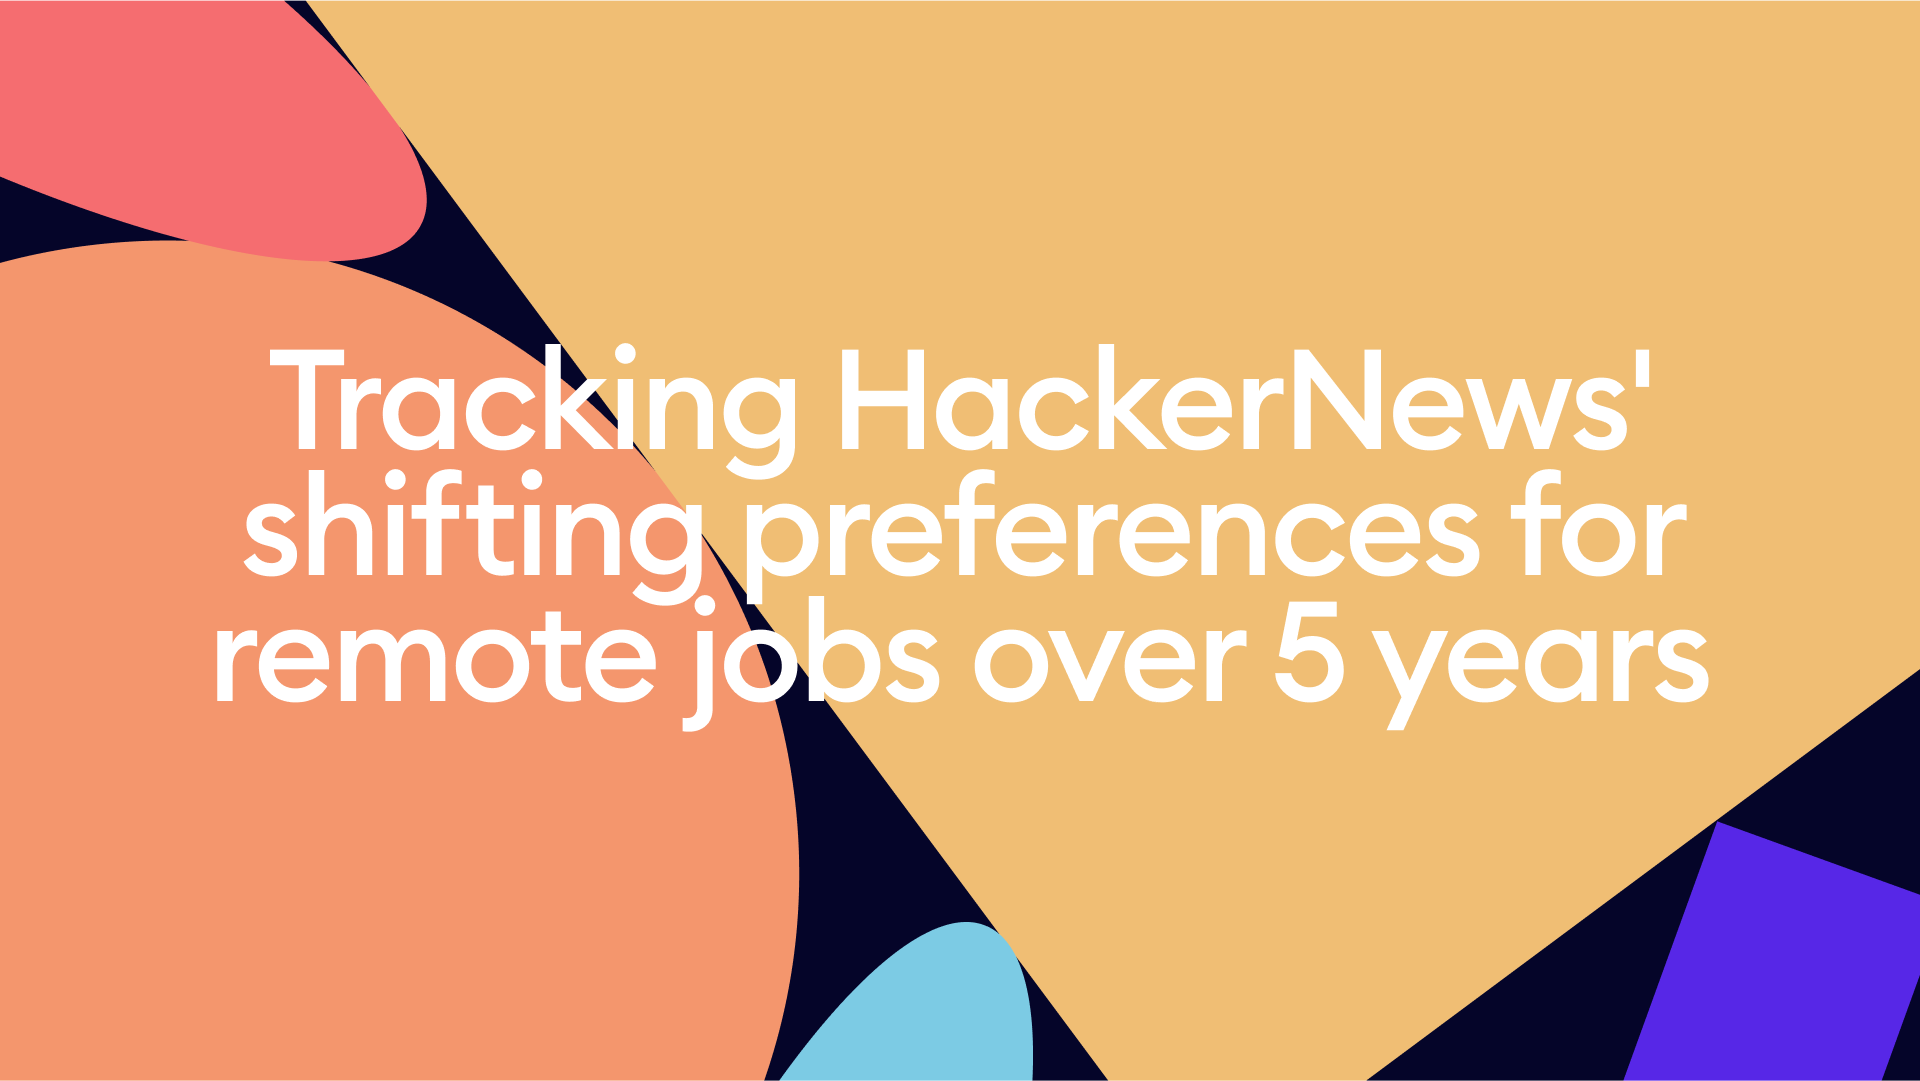 Tracking HackerNews' shifting preferences for remote jobs over 5 years